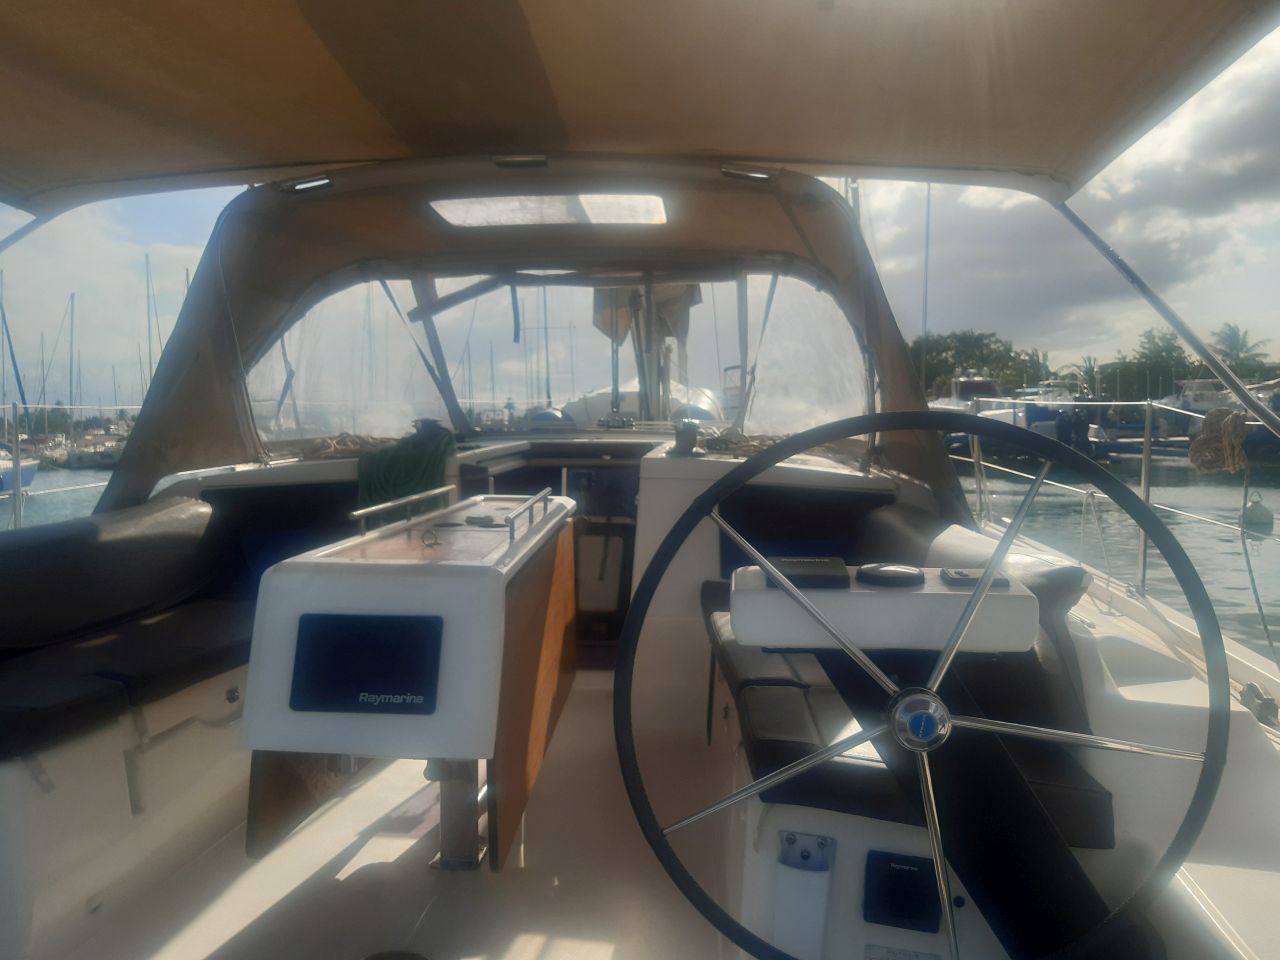 Dufour 390 GL - Sailboat Charter Guadeloupe & Boat hire in Guadeloupe Pointe a Pitre Marina de Bas du Fort 3